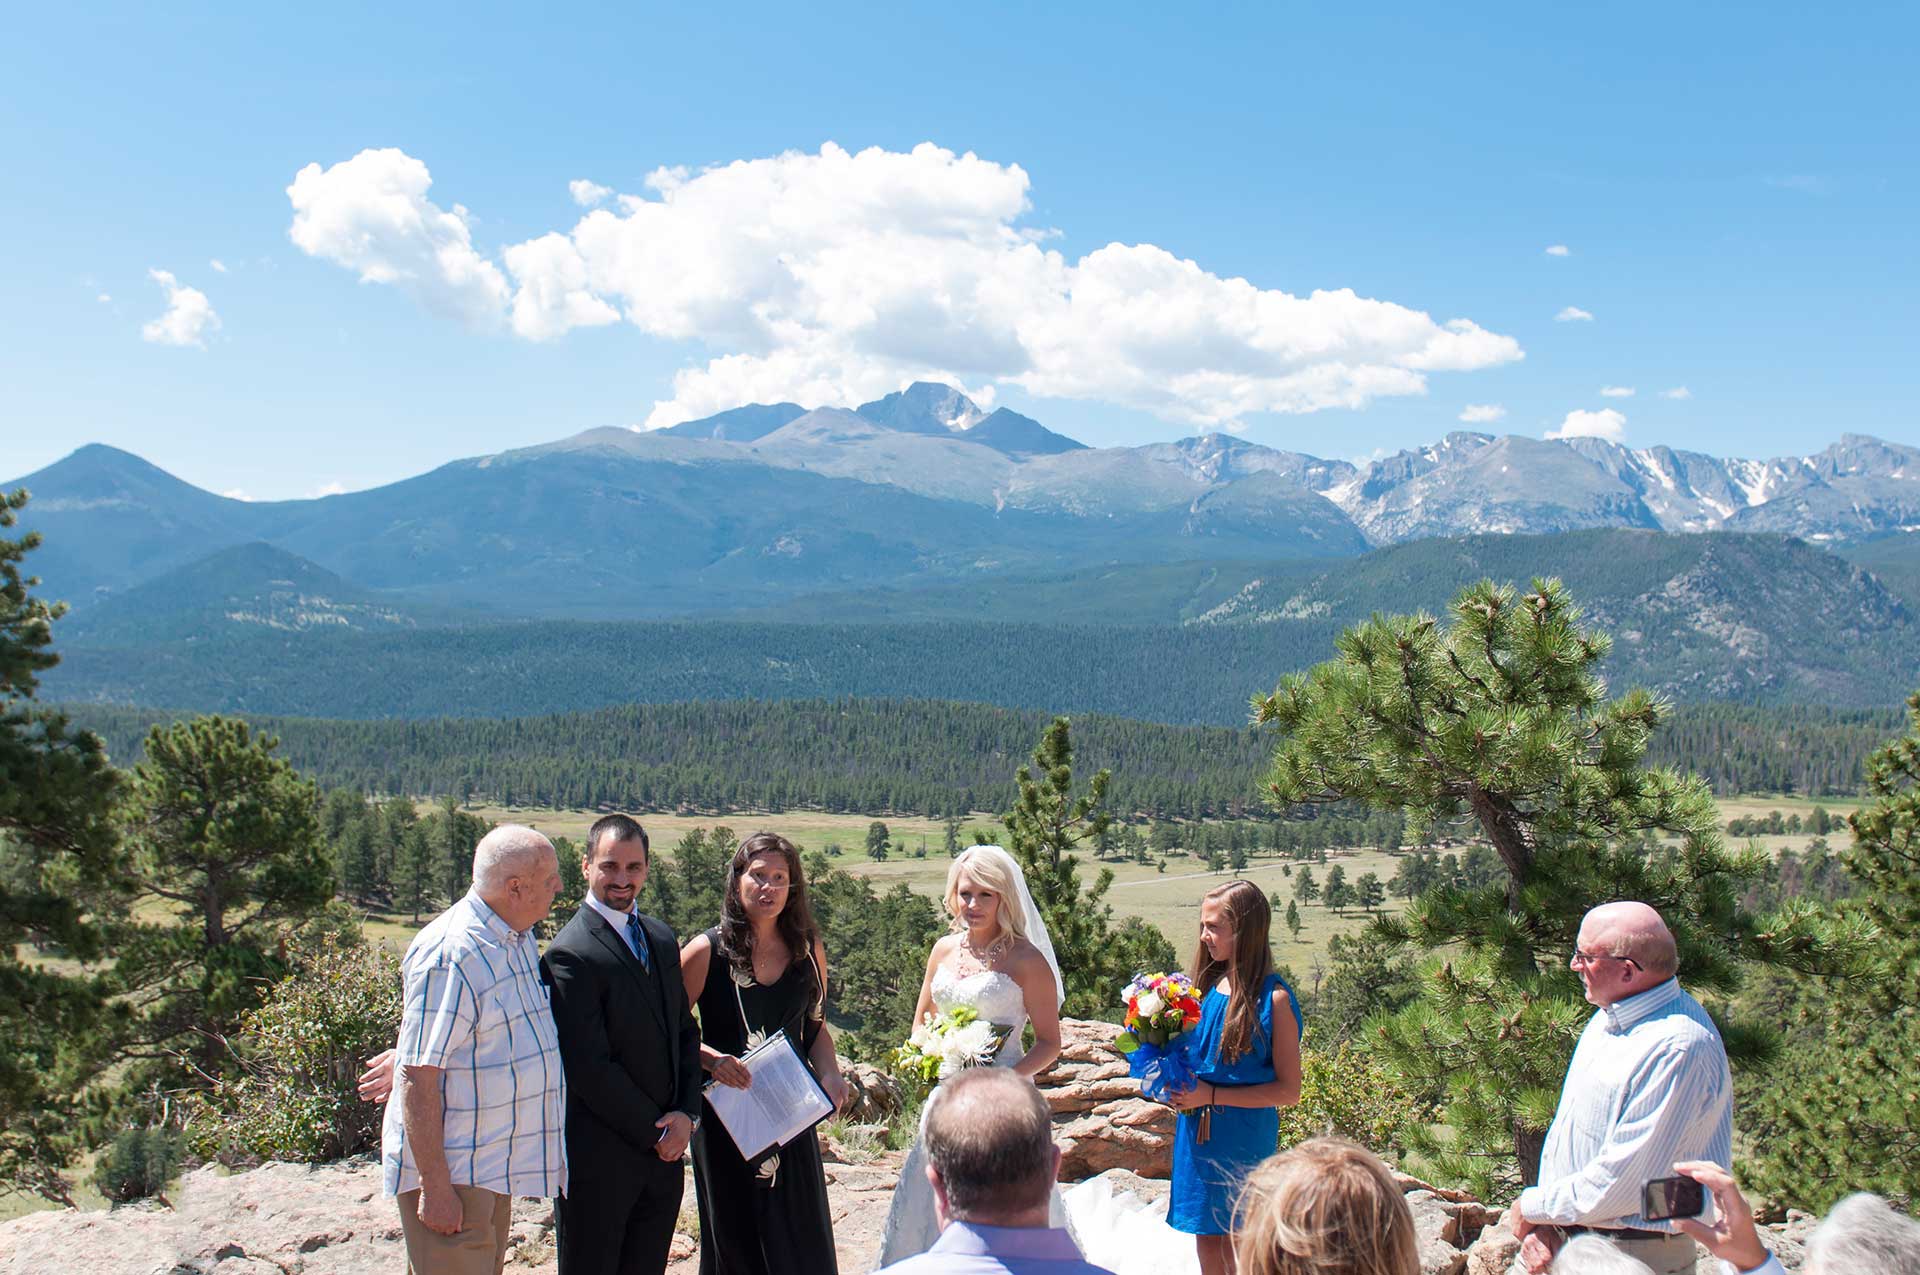 the wedding party standing with the mountains in the background